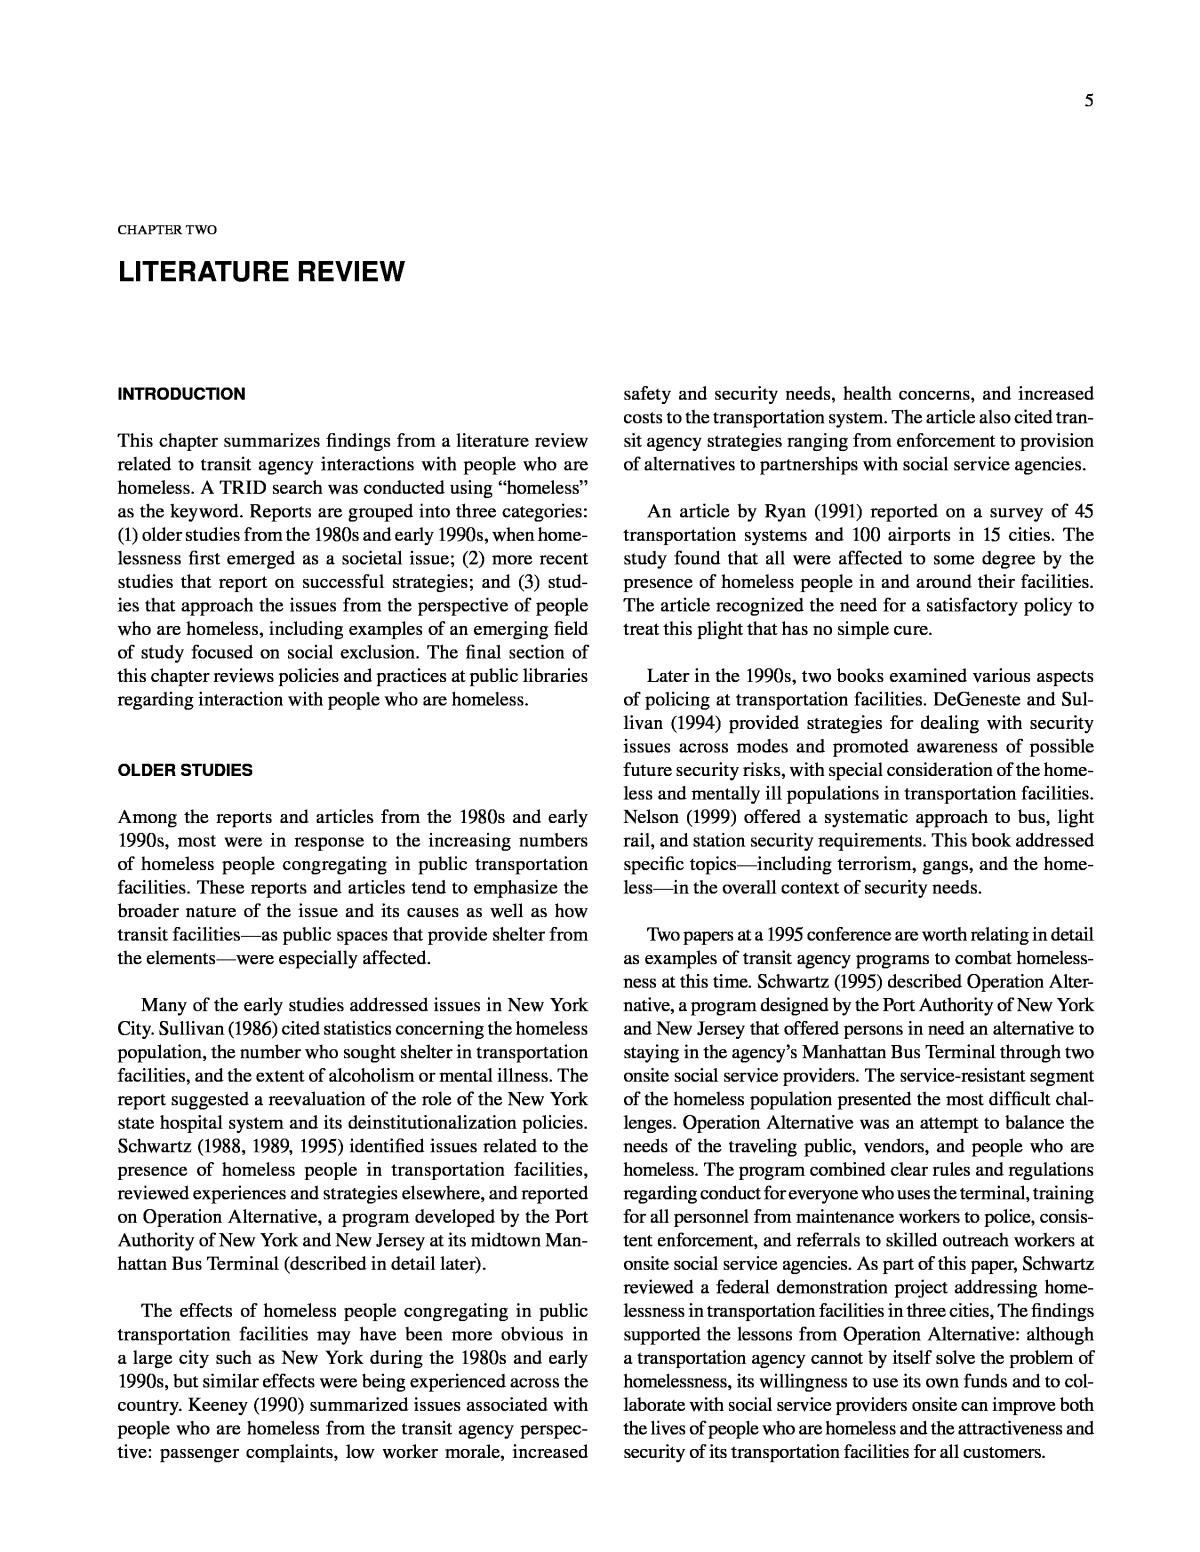 sample literature review on homelessness